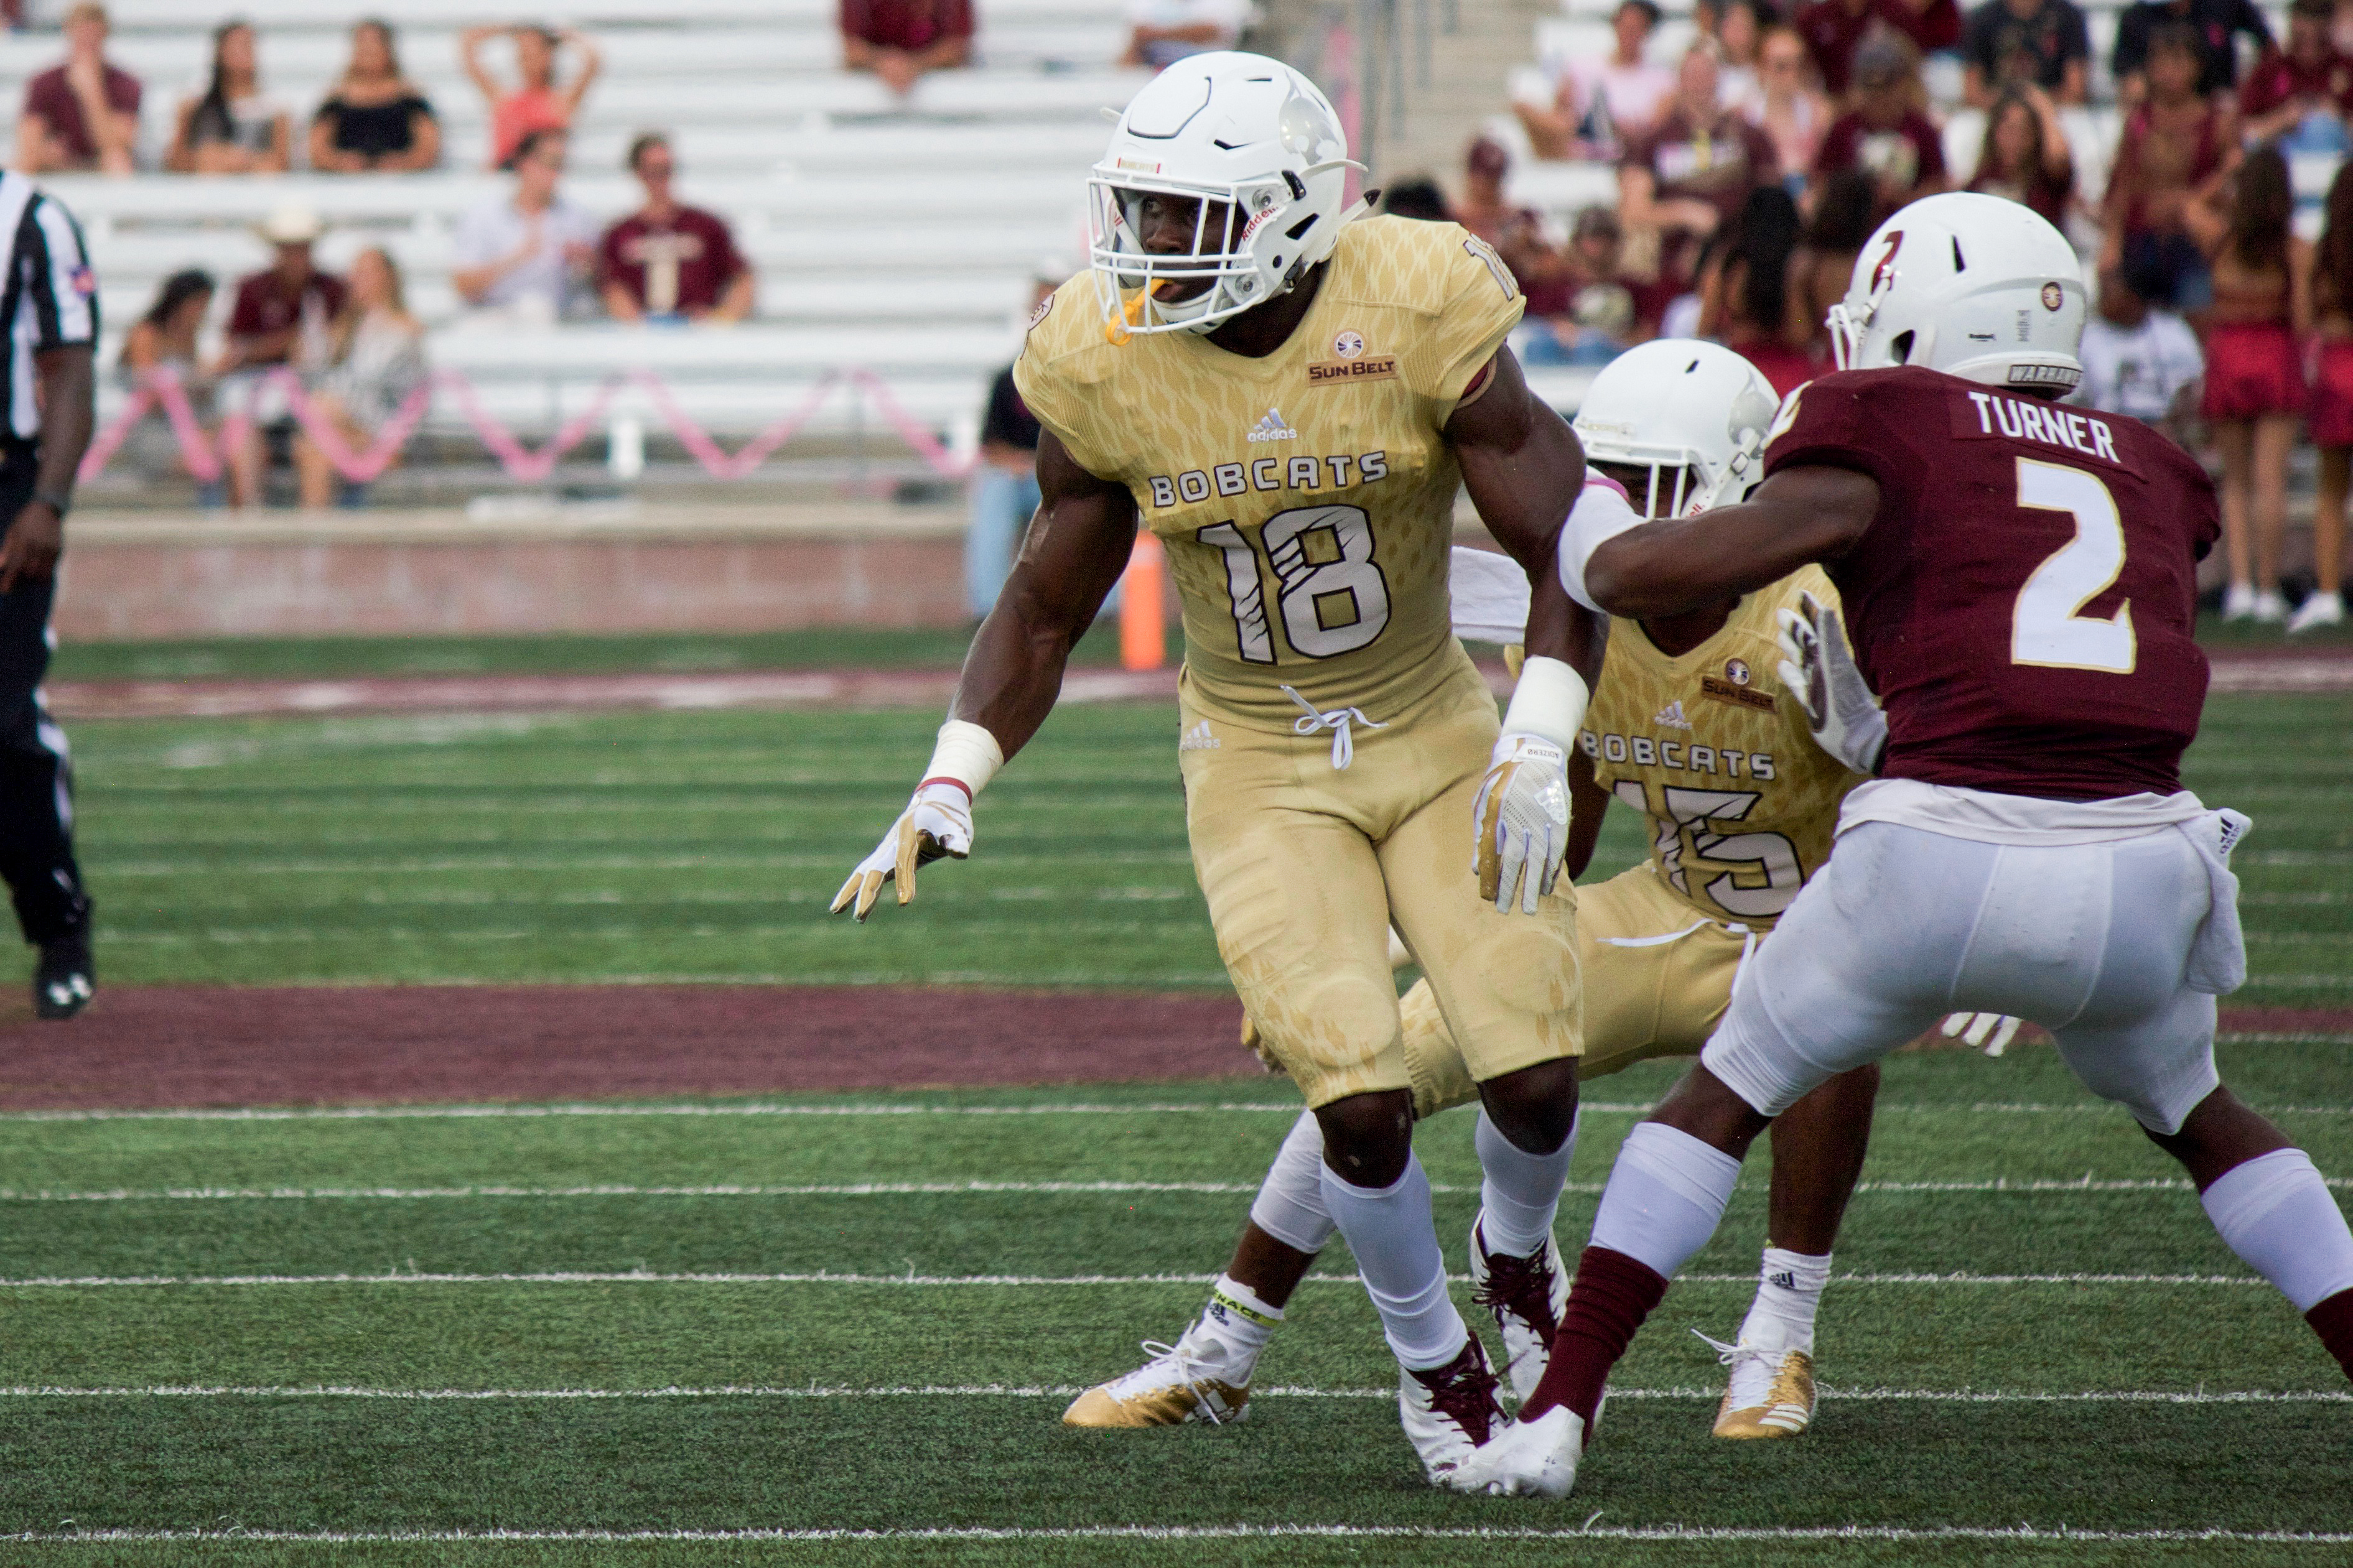 In a bright golden jersey, linebacker Frankie Griffin takes an aggressive step-forward against the night black jerseys of the University of Louisiana-Monroe. 